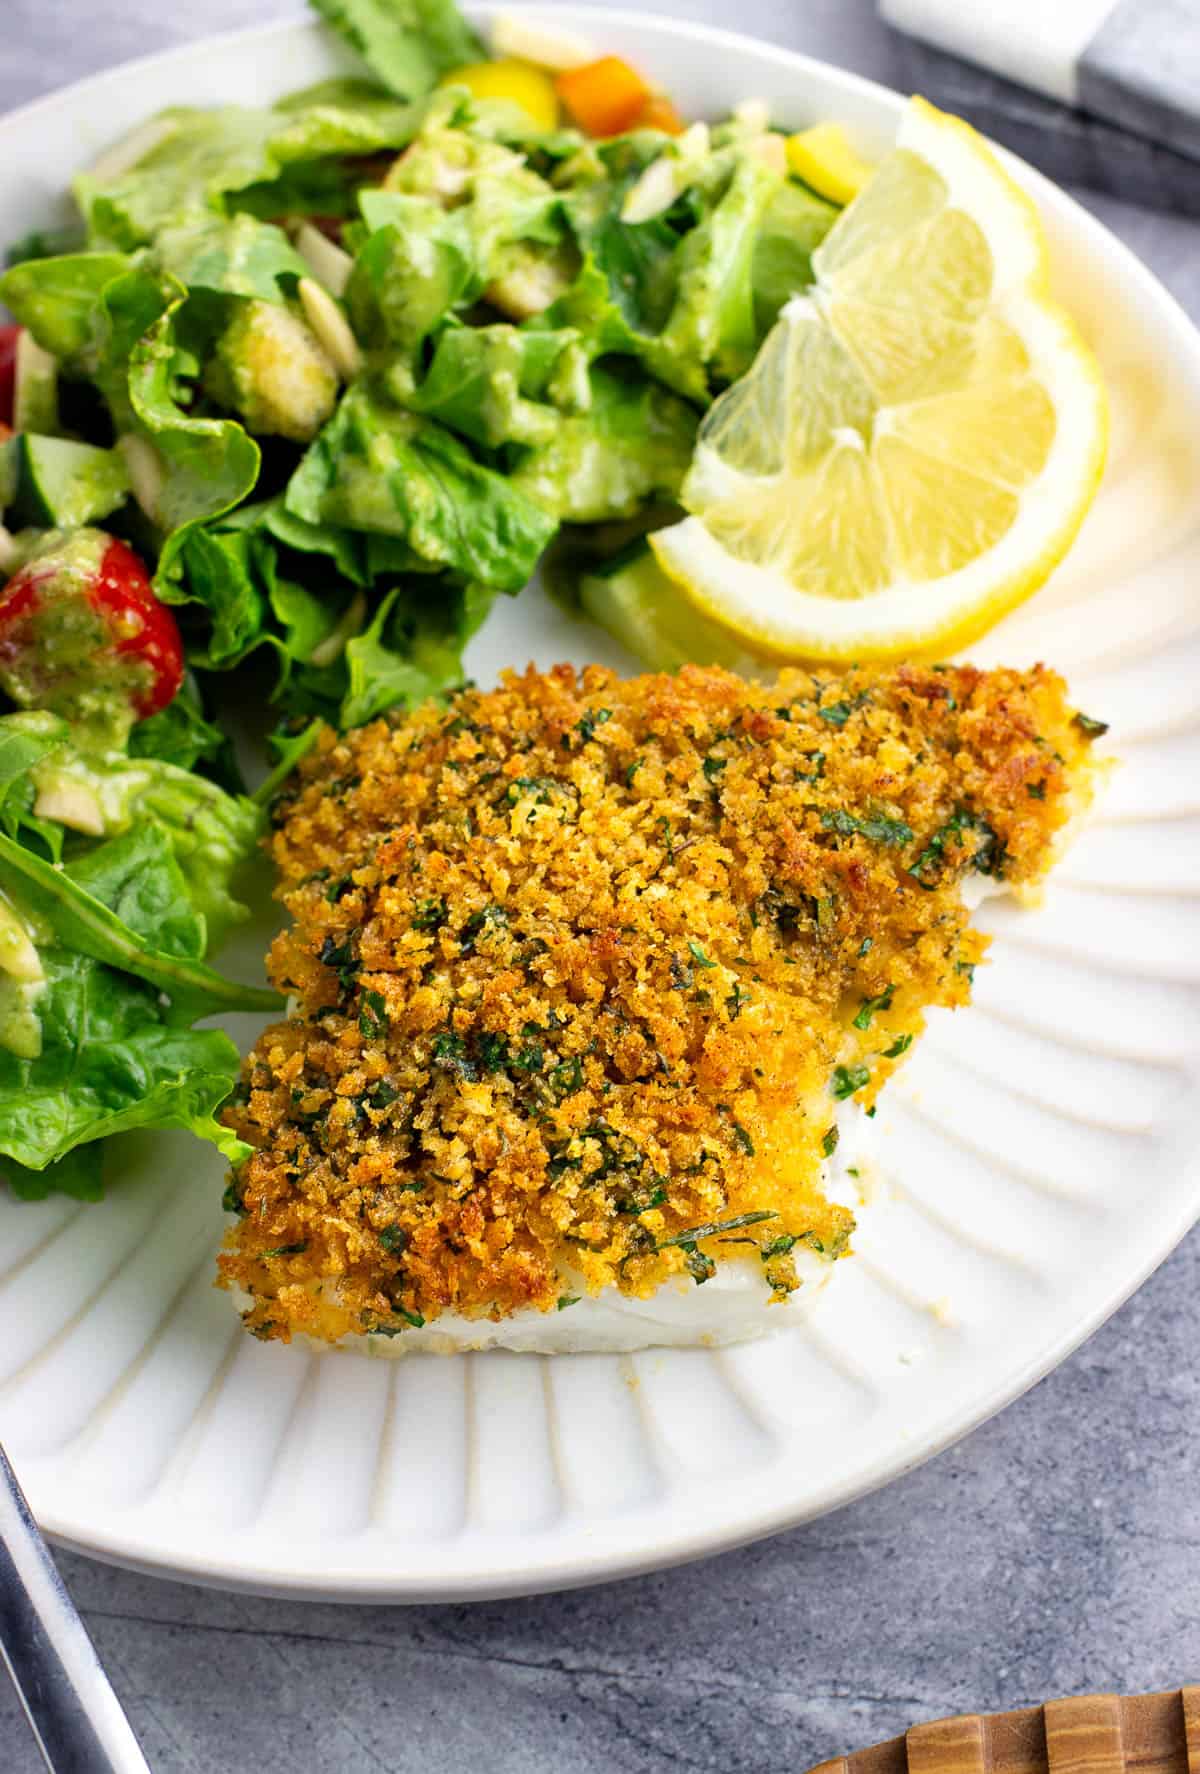 A whole cod fillet on a plate topped with a crispy baked panko crust.